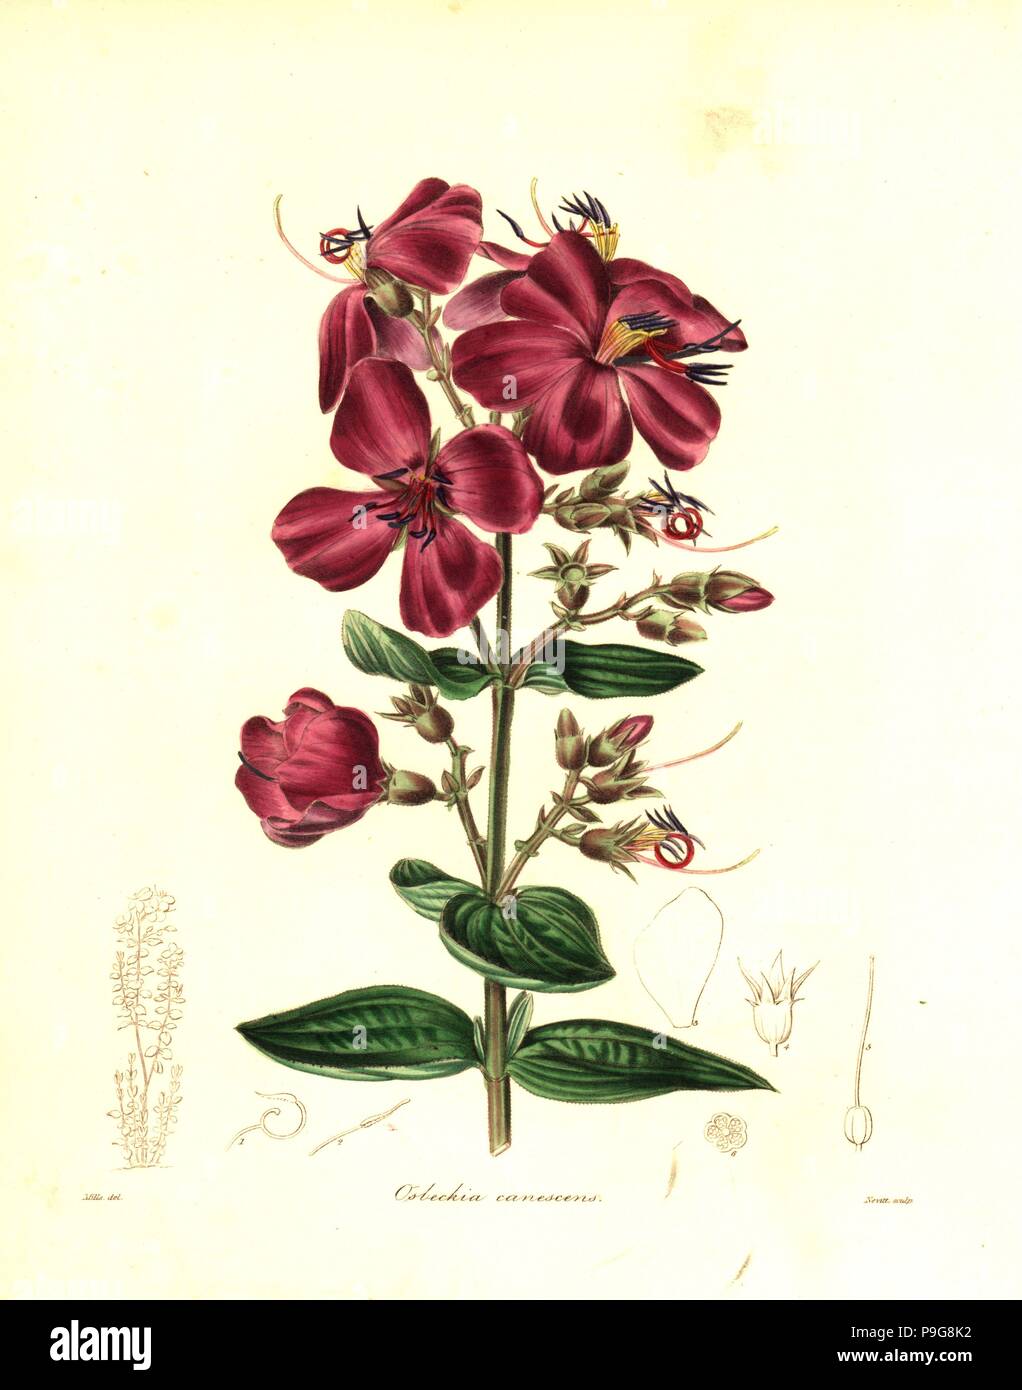 Heterotis canescens (Hoary osbeckia, Osbeckia canescens). Handcoloured copperplate engraving by Mills after a botanical illustration by Mrs Augusta Withers from Benjamin Maund and the Rev. John Stevens Henslow's The Botanist, London, 1836. Stock Photo